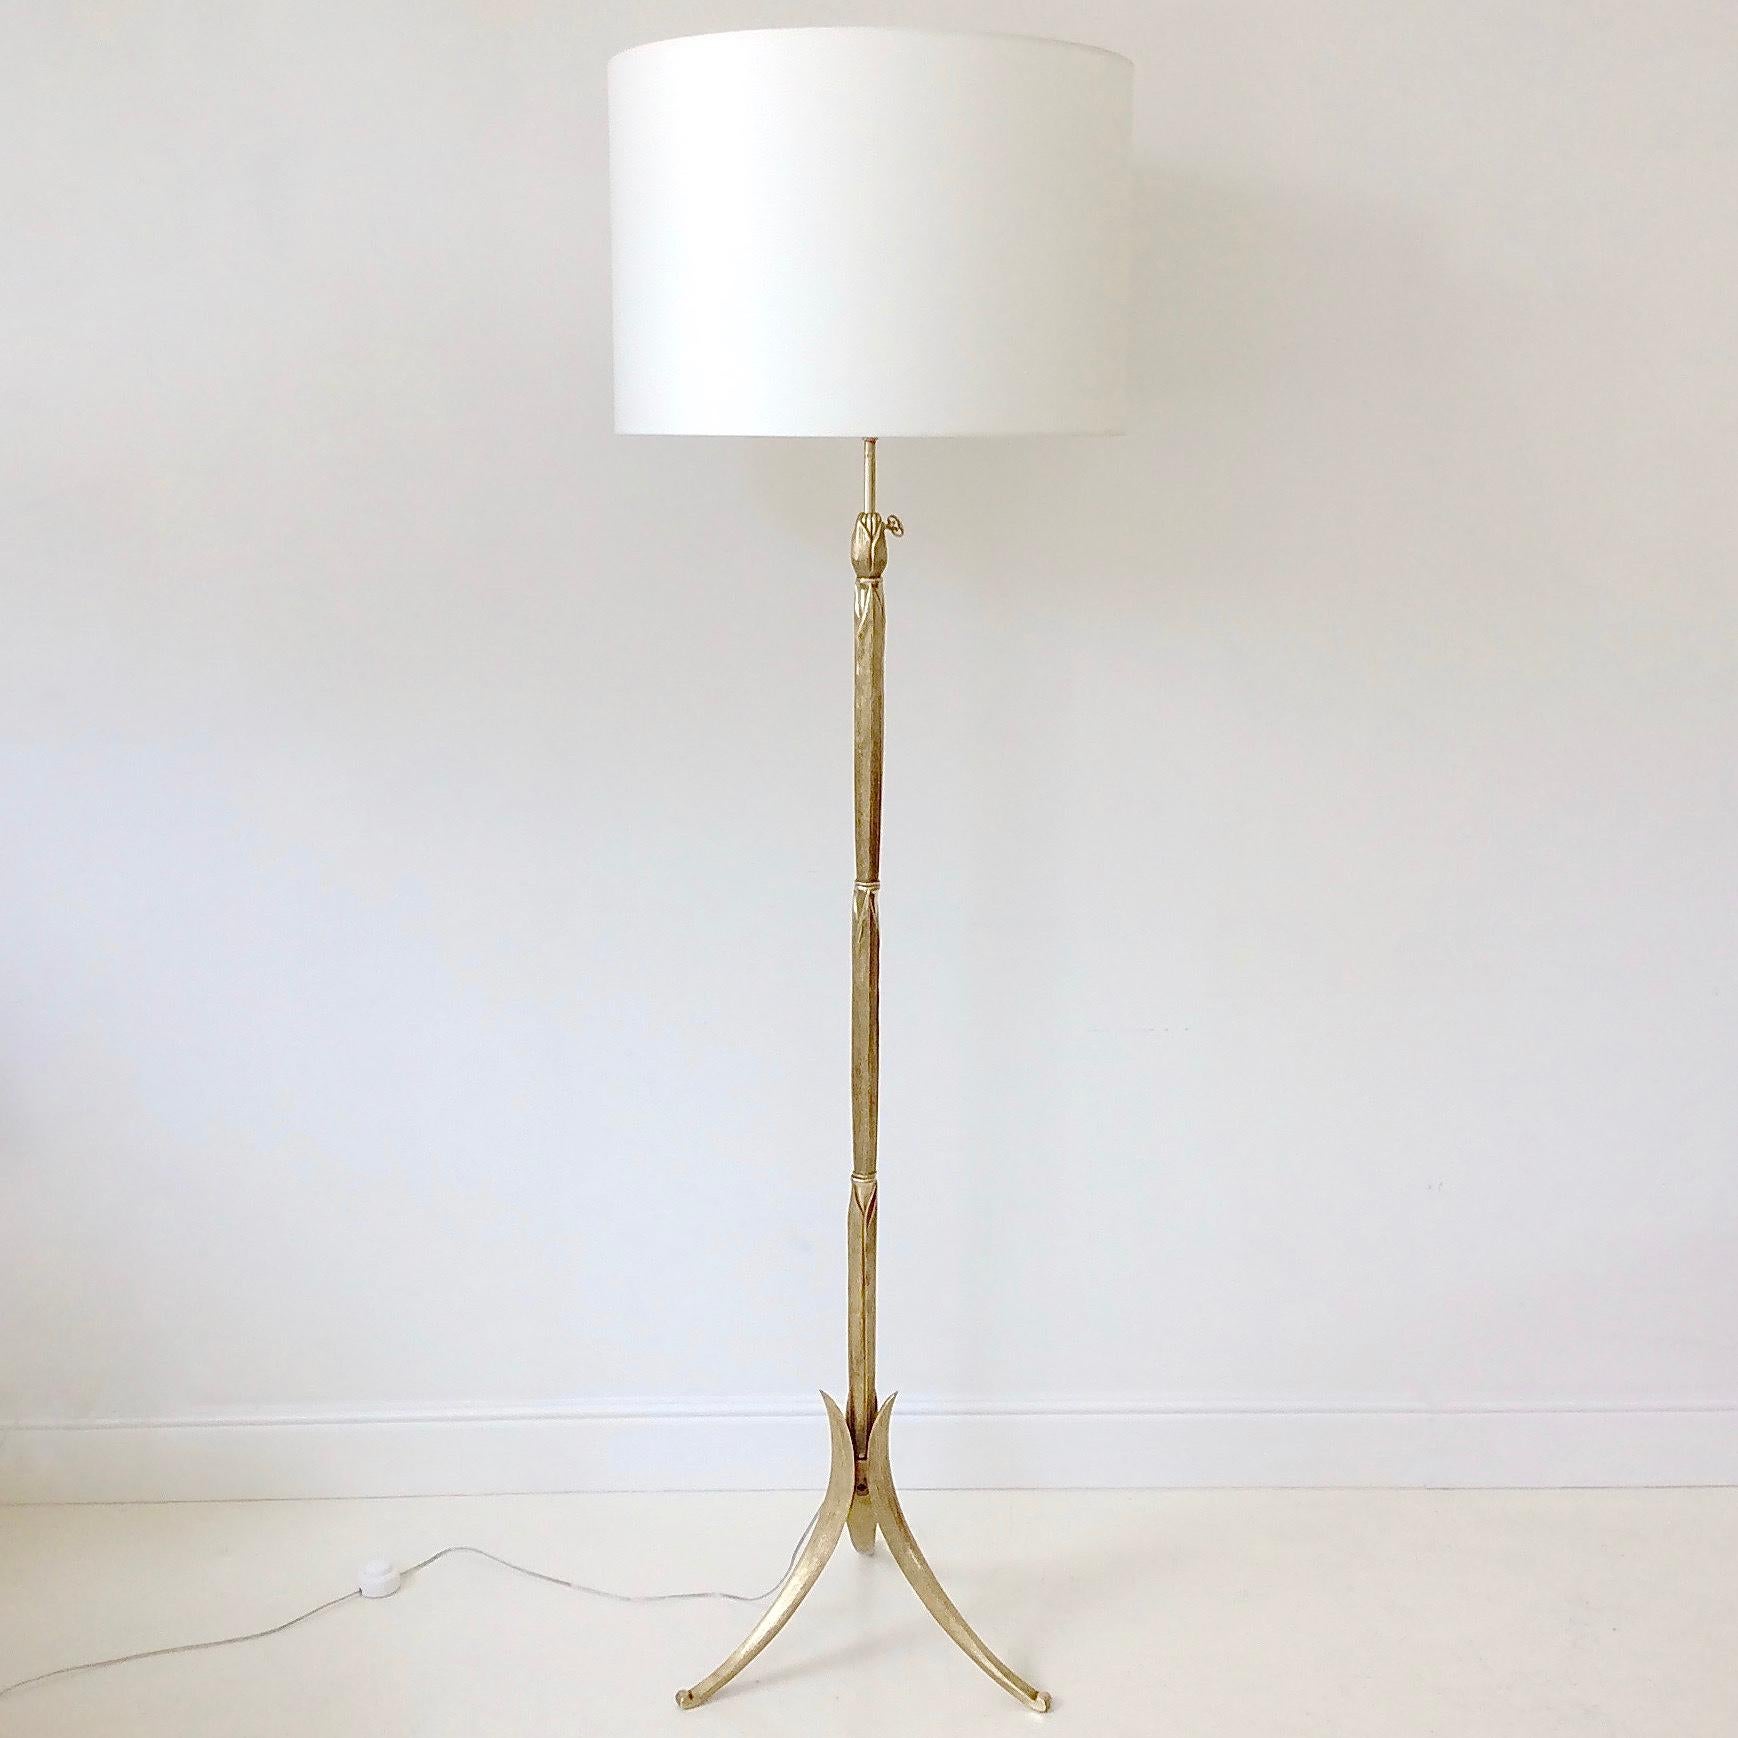 Elegant Maison Charles Maïs model floor lamp, circa 1970, France.
Cast gold bronze, new white fabric shade.
Stamped Maison Charles et Fils, made in France.
Rewired.
Adjustable height.
Dimensions: 175 cm H, 51 cm diameter.
All purchases are